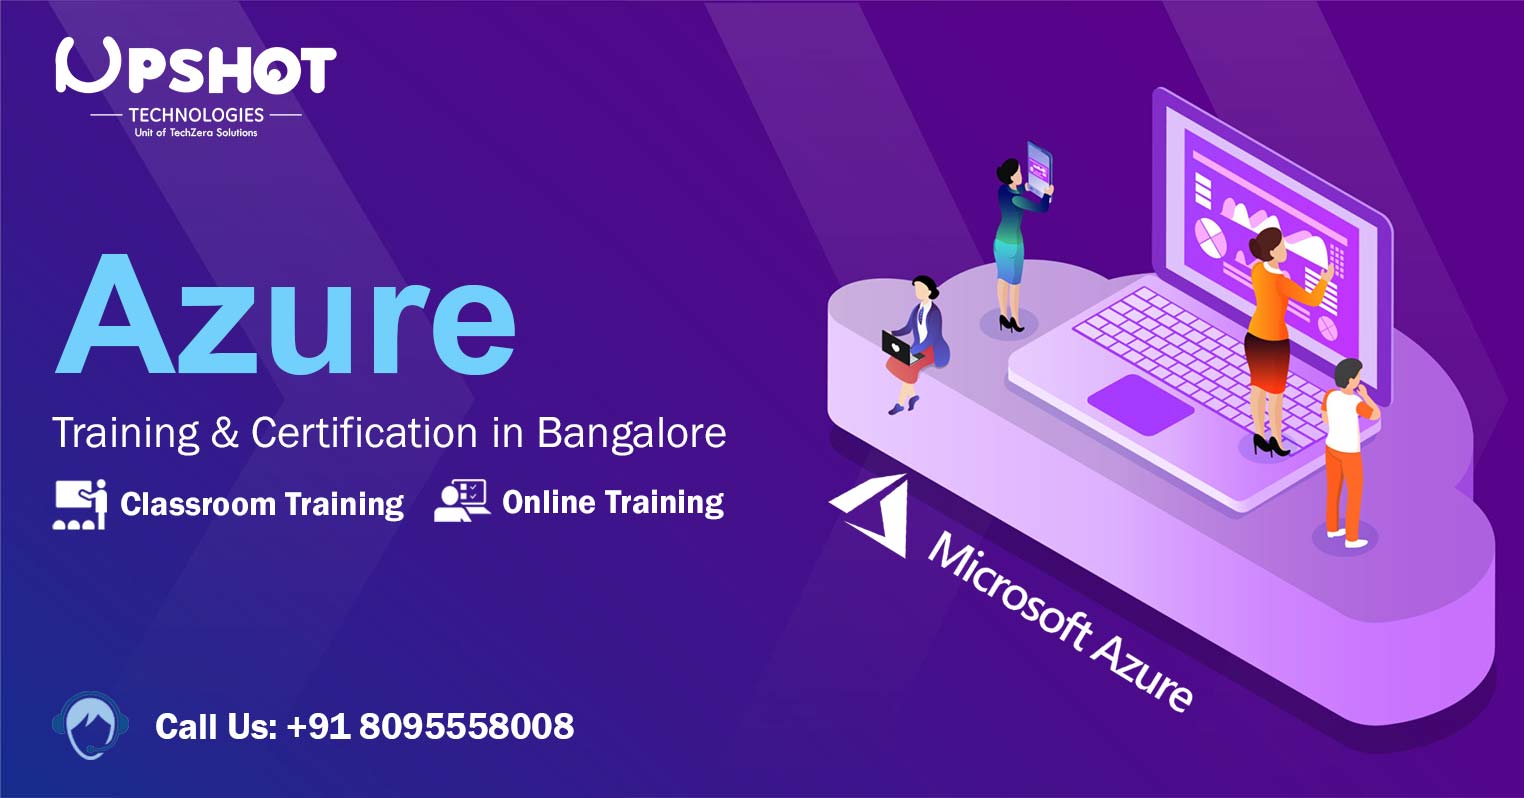 Microsoft Office 365 Software, Free demo available at best price in  Bengaluru